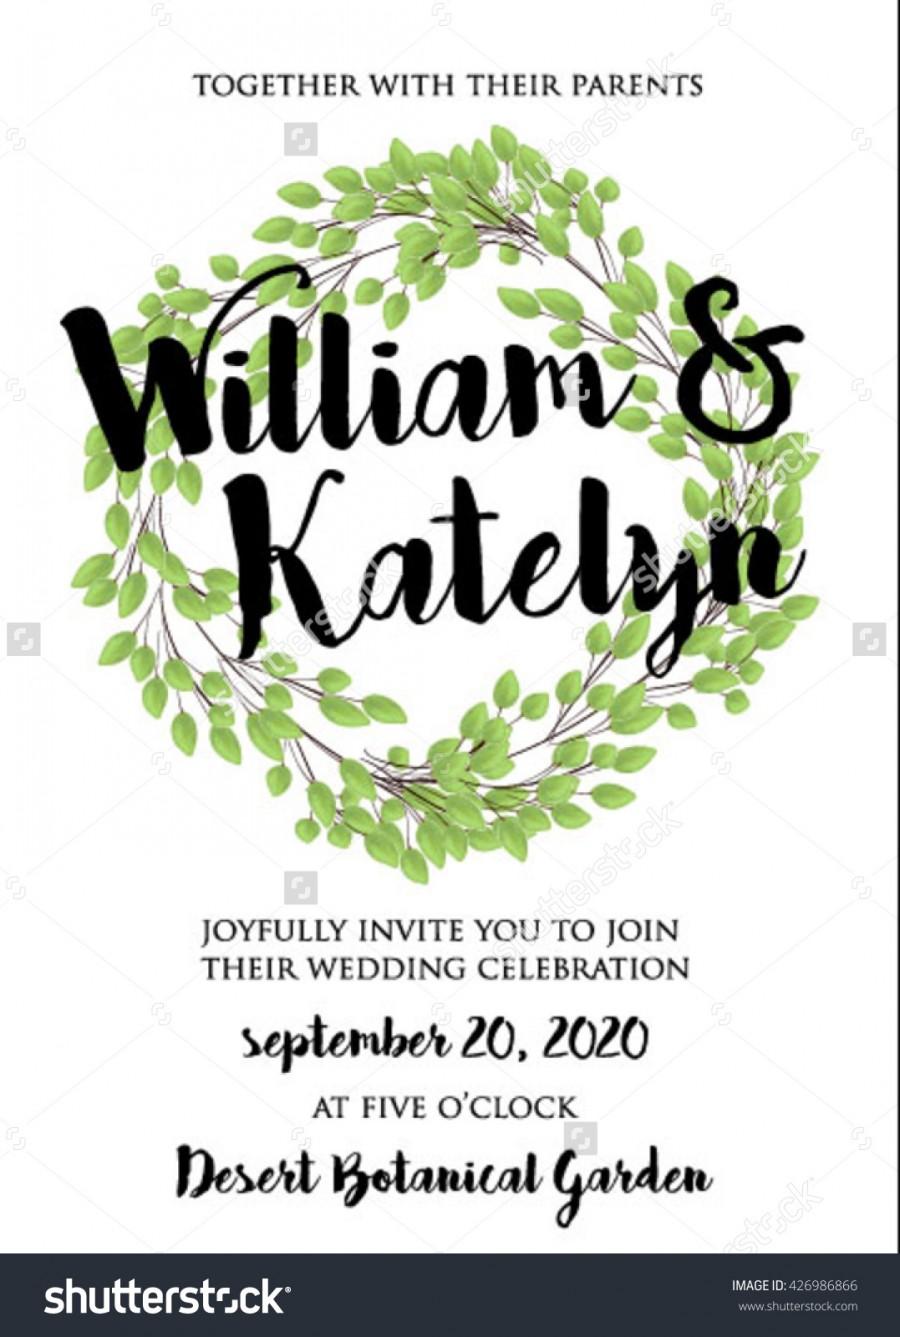 Wedding - Wedding invitation, thank you card, save the date cards. Wedding set. RSVP card Vector hand drawn watercolor laurel wreath. Template with green branches,leaves wreath,laurels